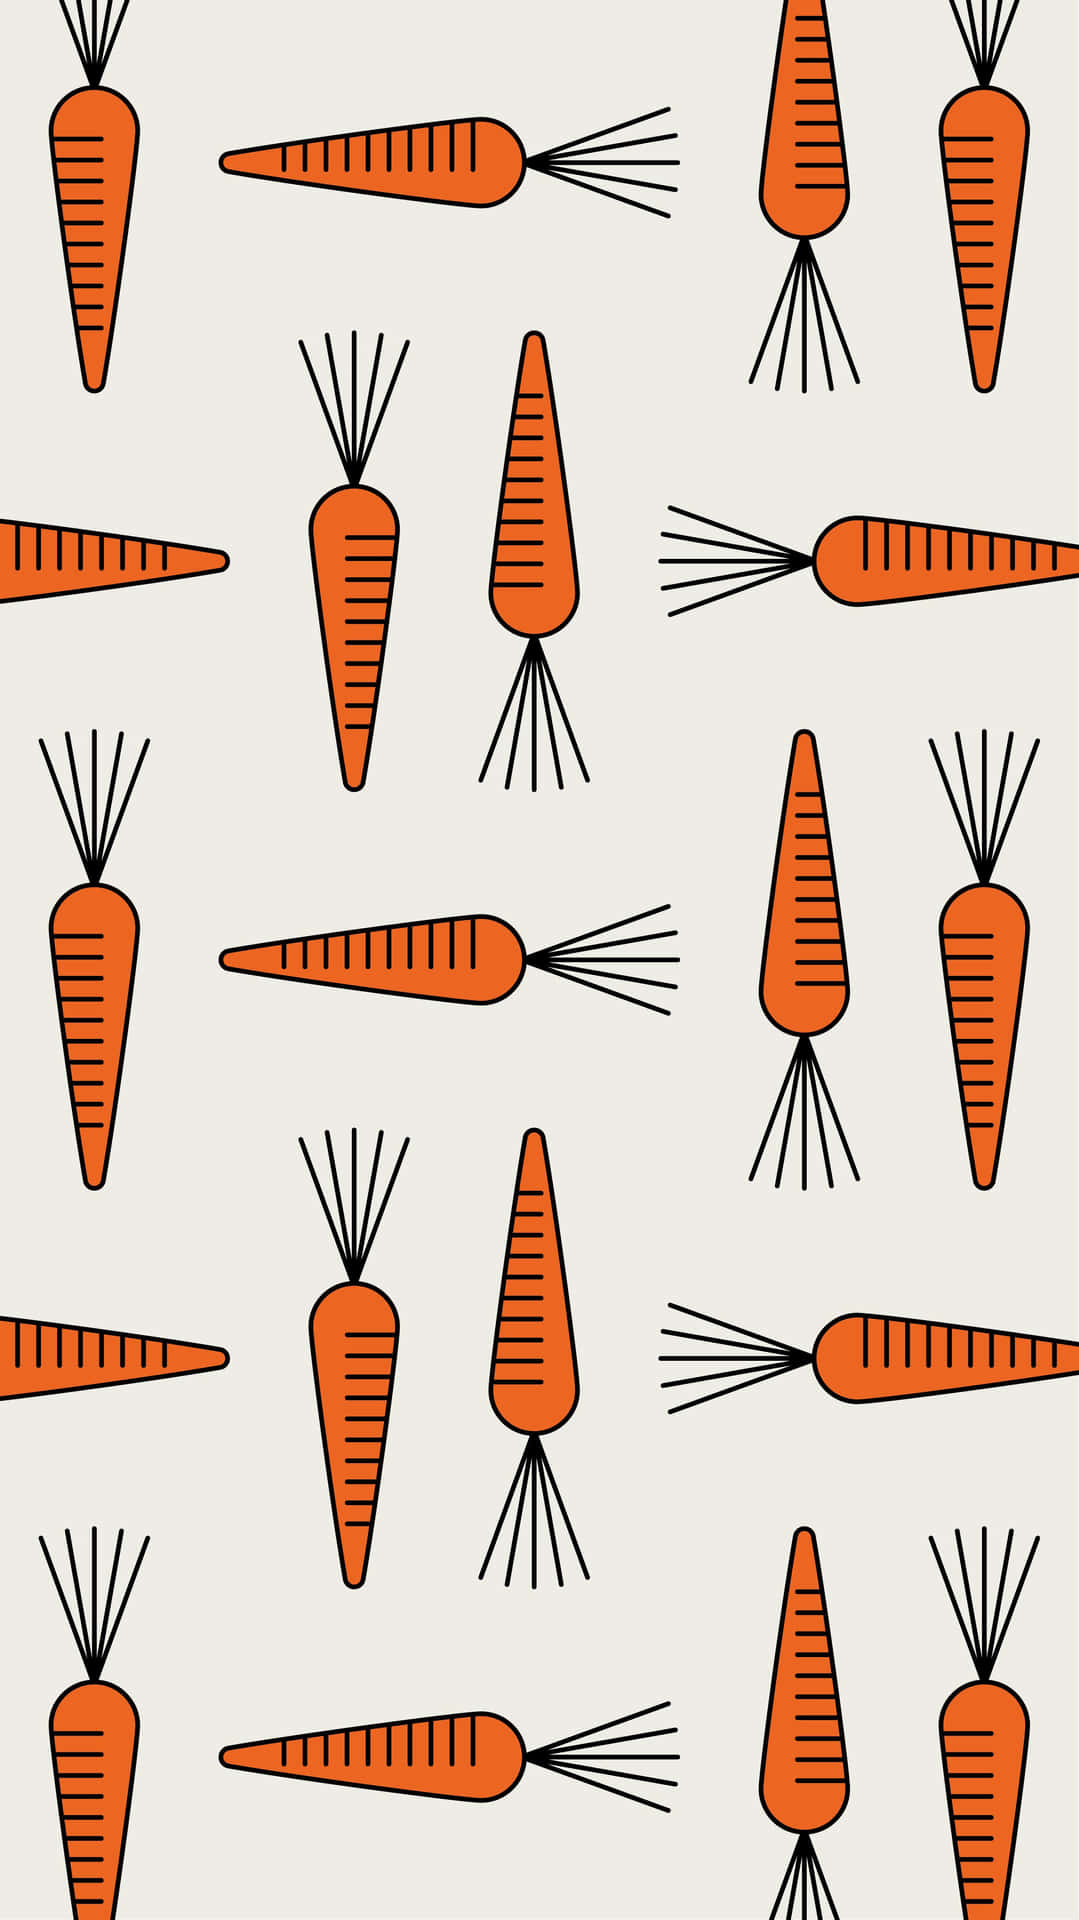 A Seamless Pattern Of Carrots On A White Background